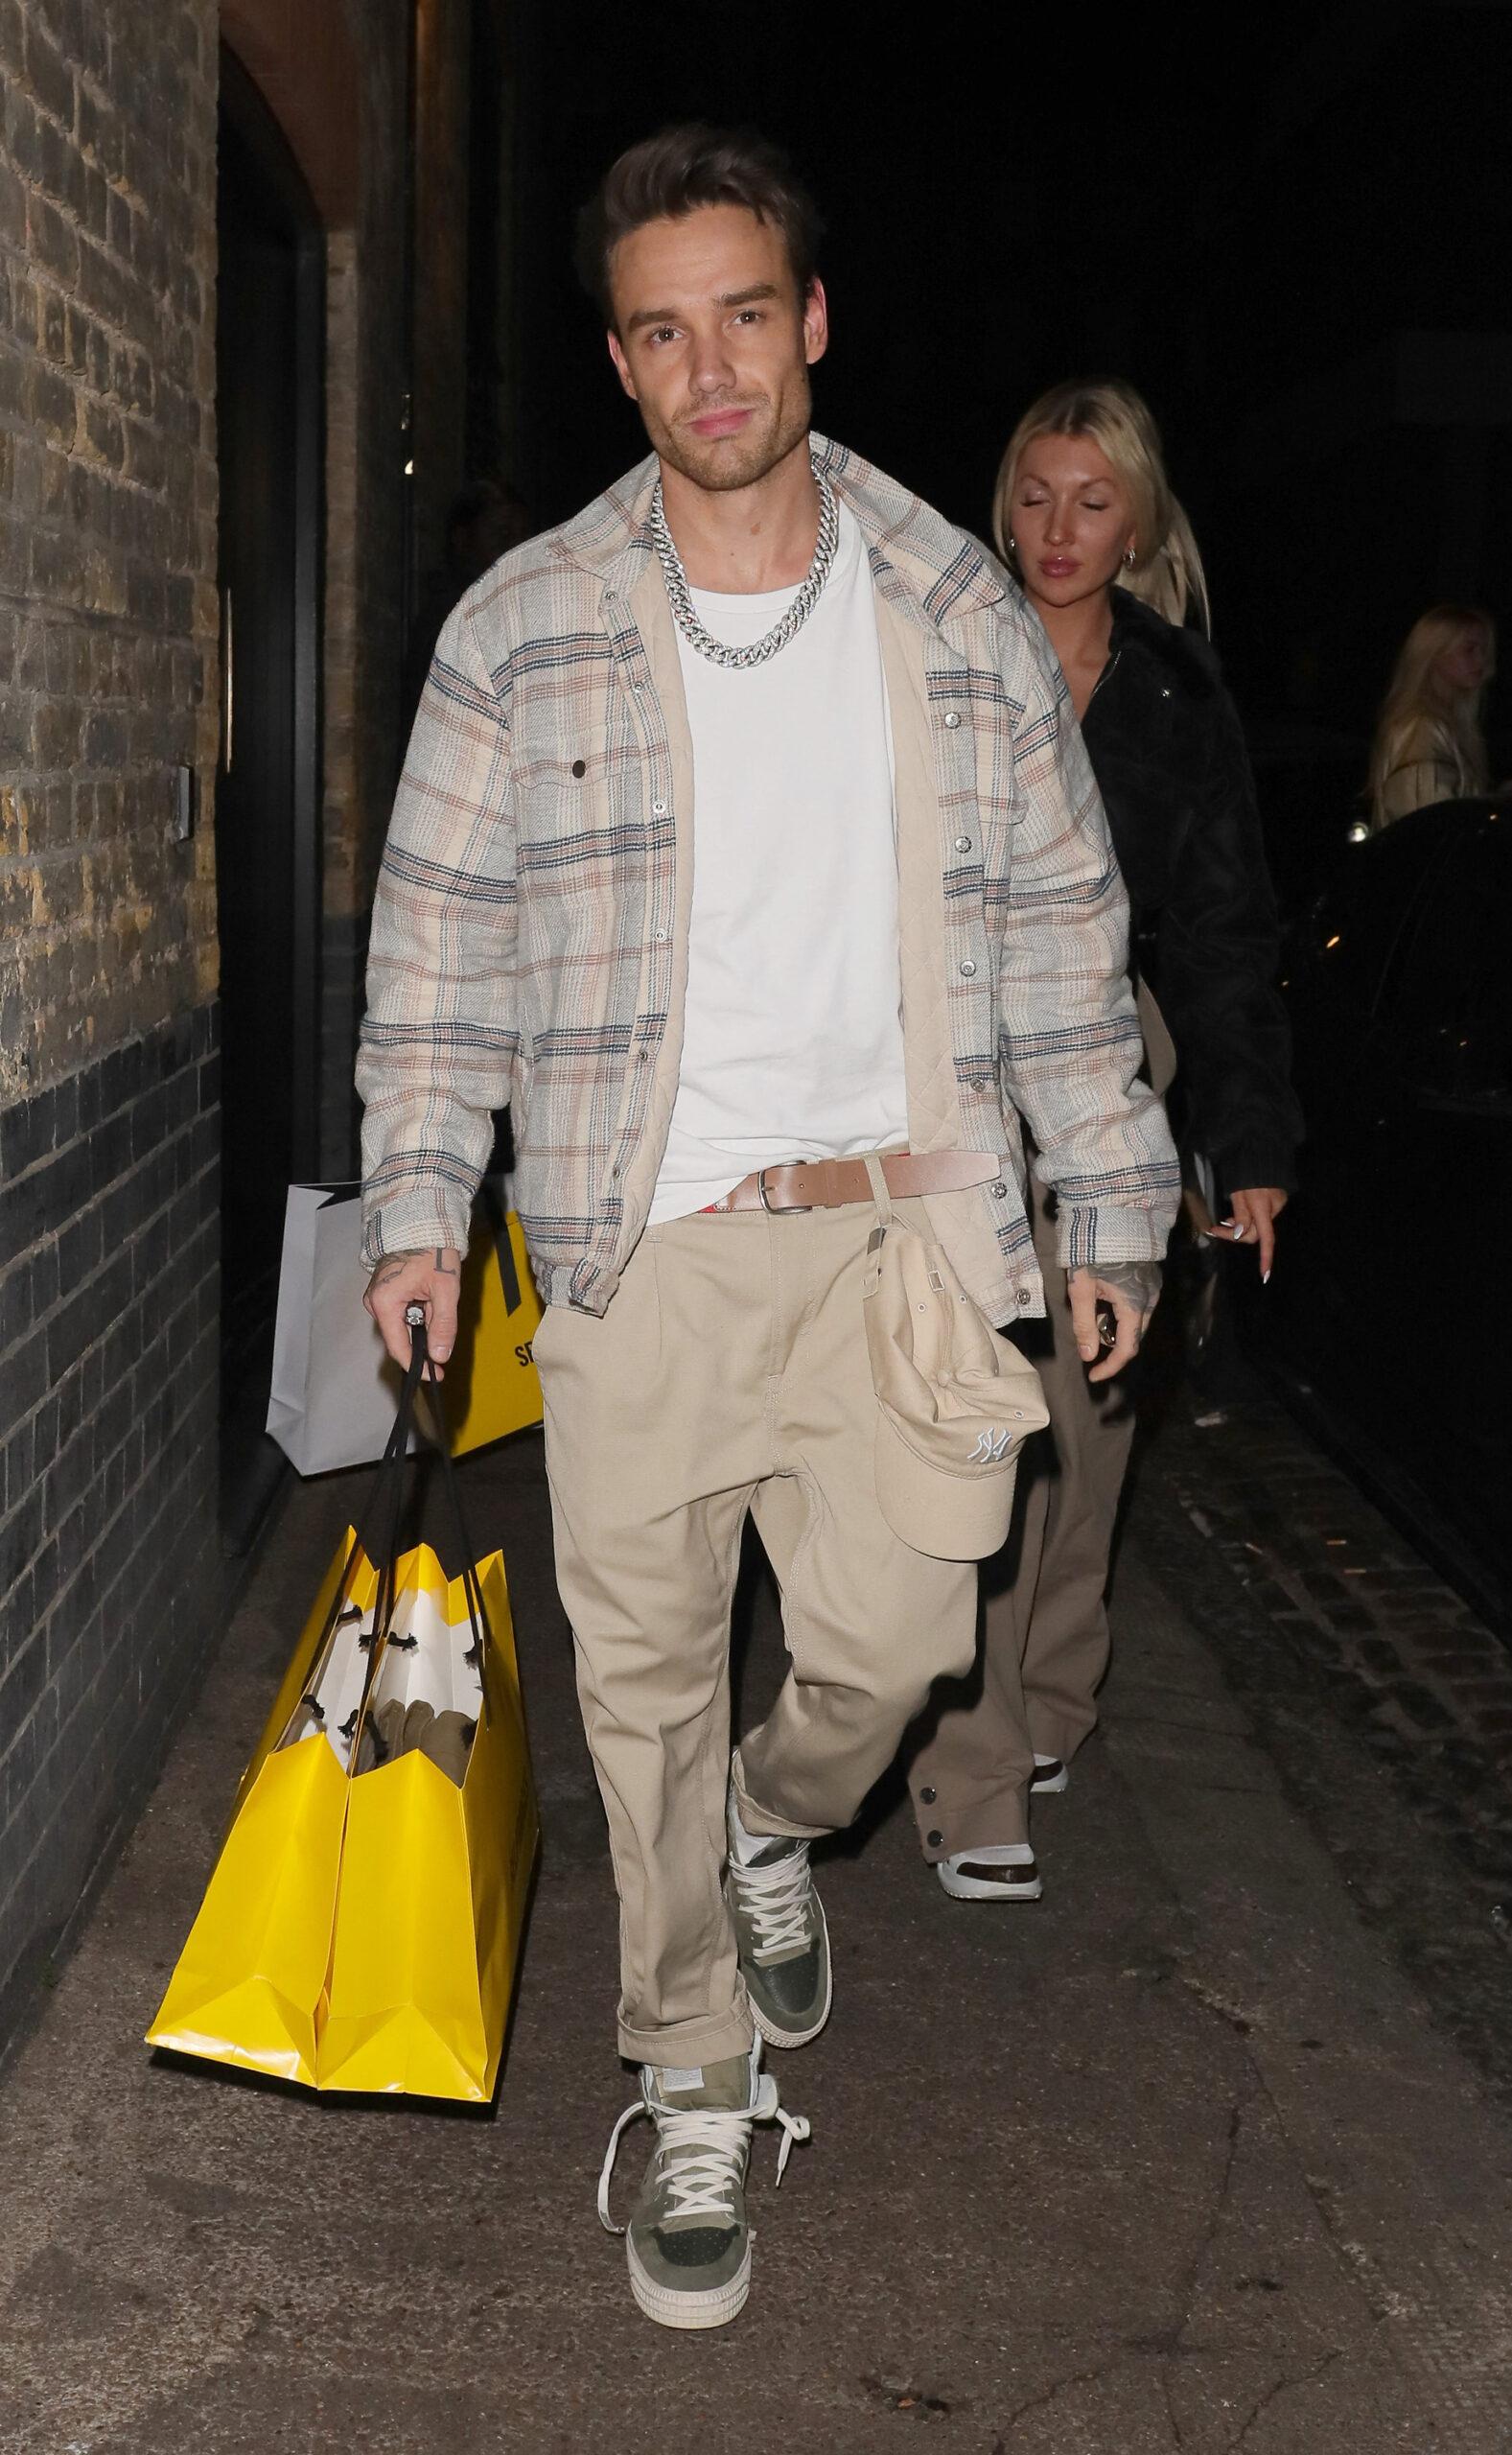 Liam Payne at the Chiltern Firehouse